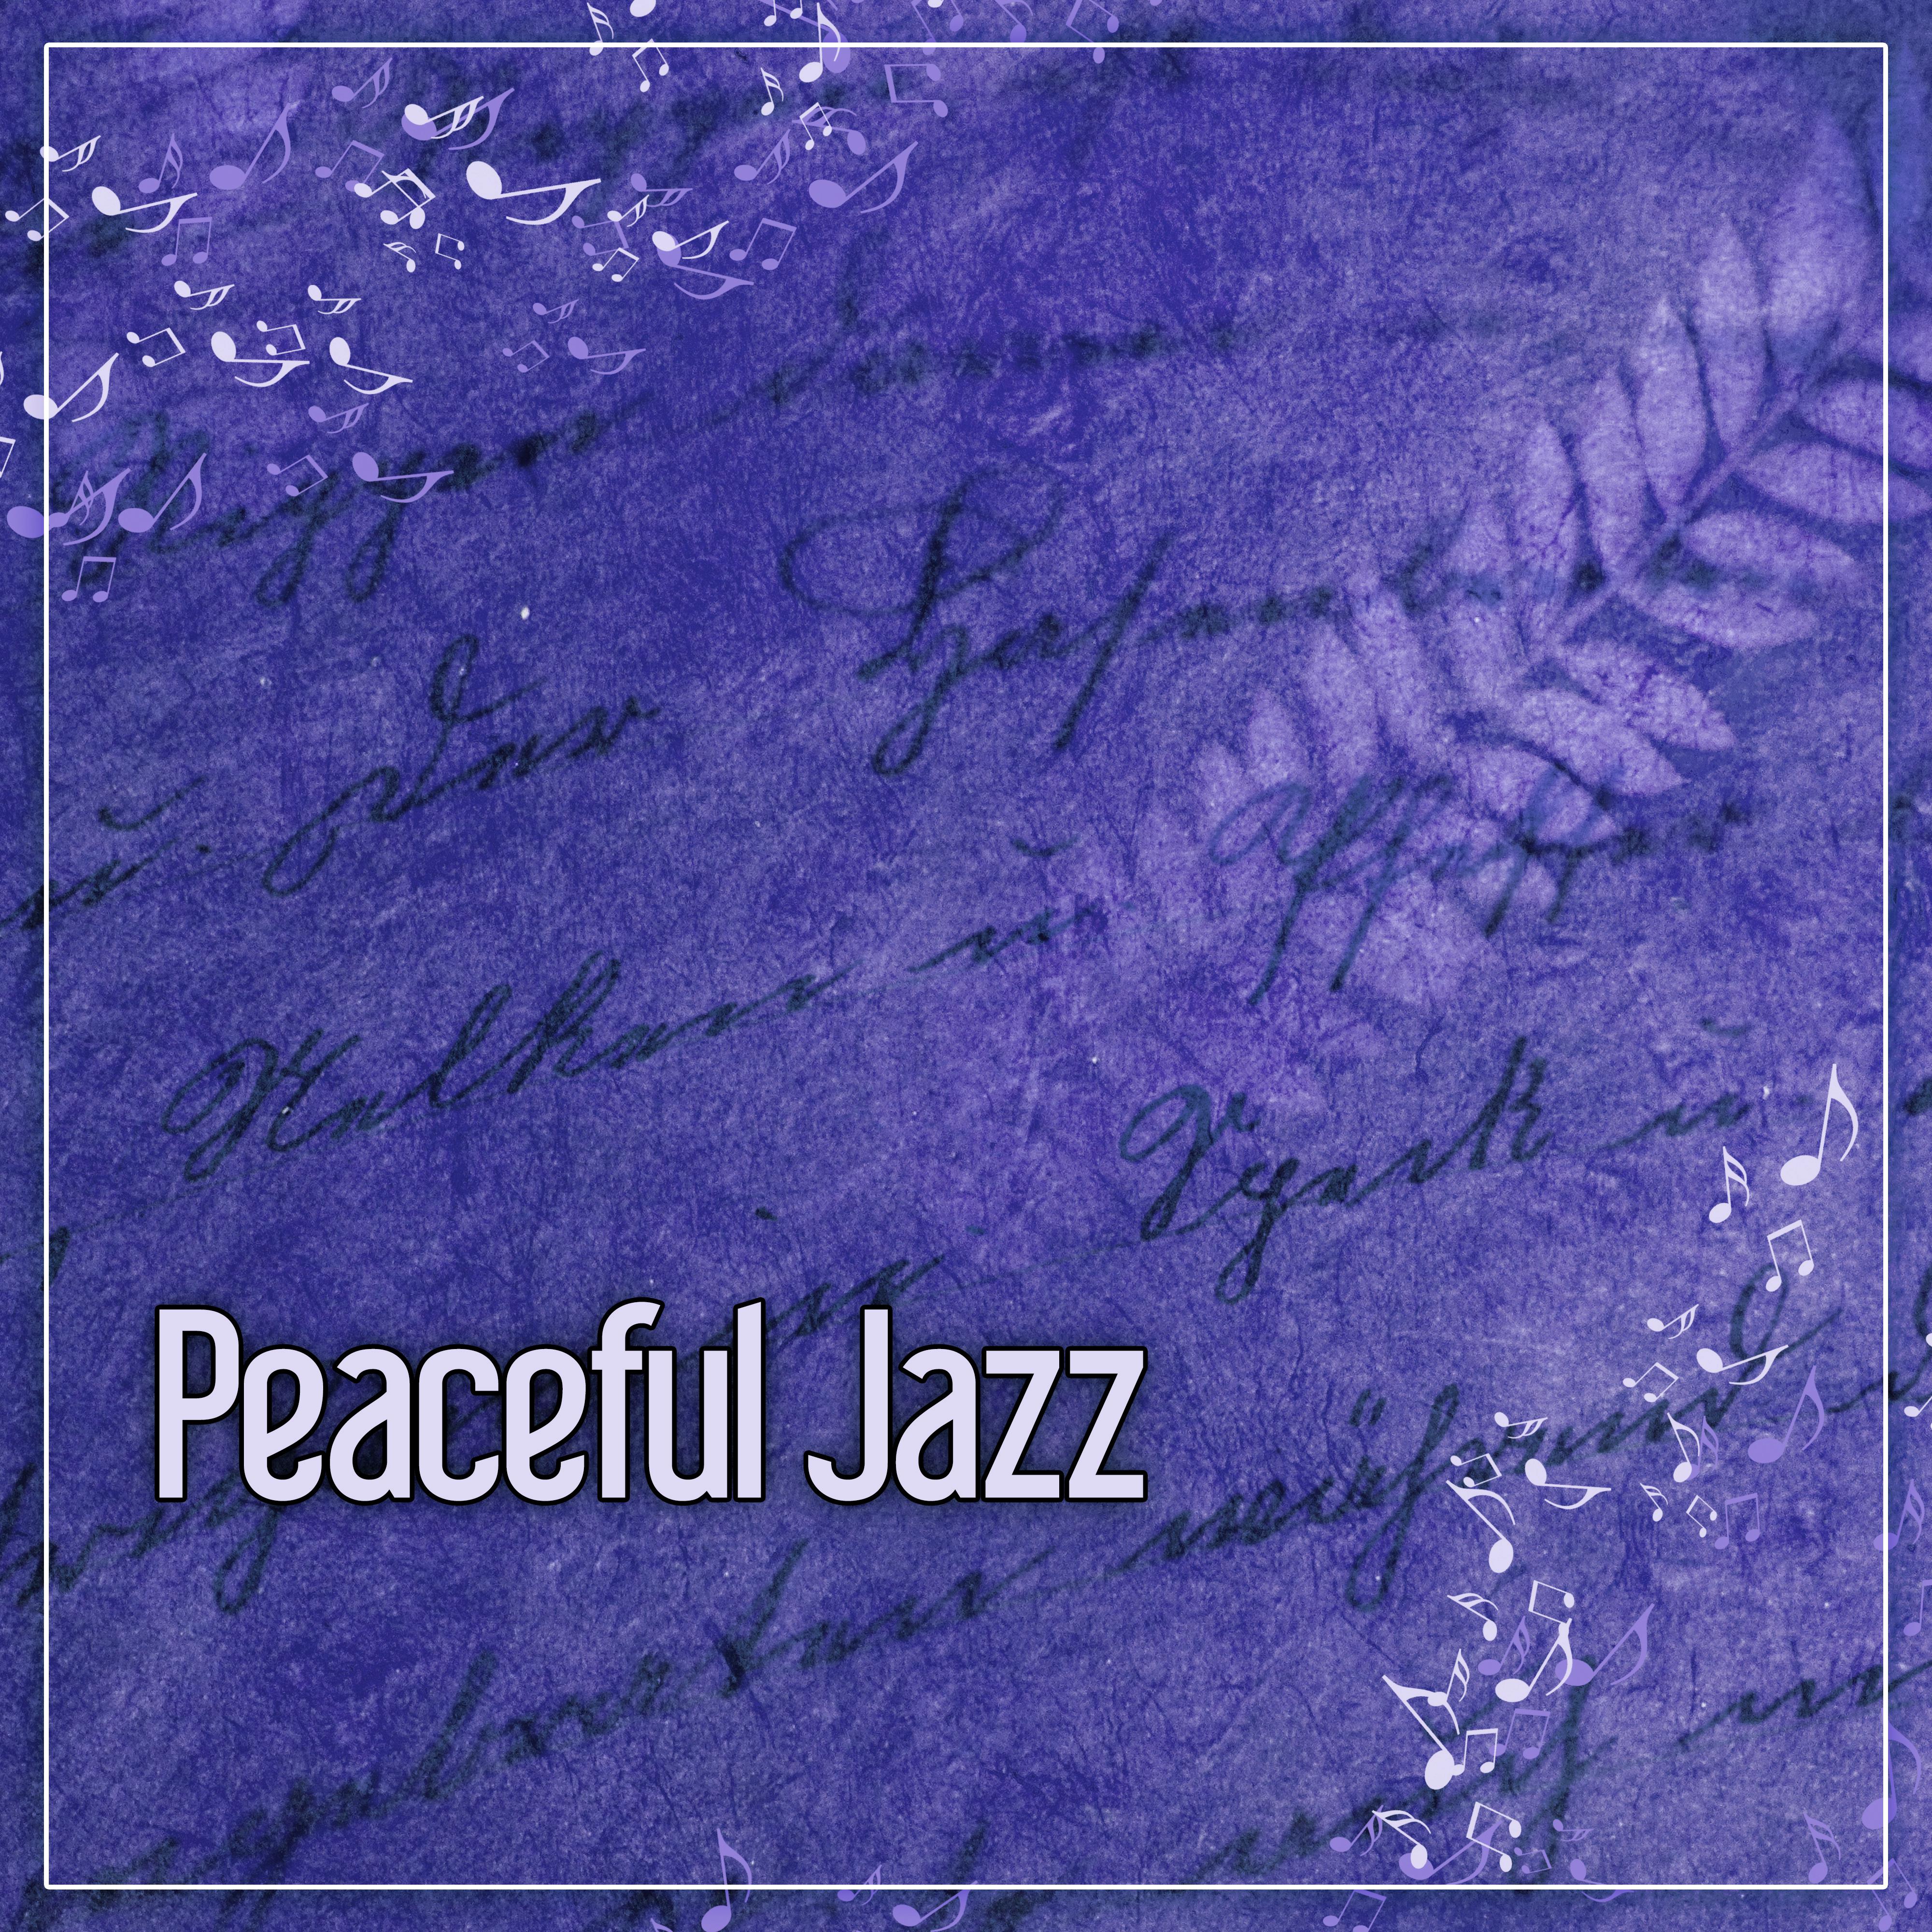 Peaceful Jazz – Soft Piano Jazz, Mellow Sounds for Stress Relief, Background Music to Relax, Beautiful Moments